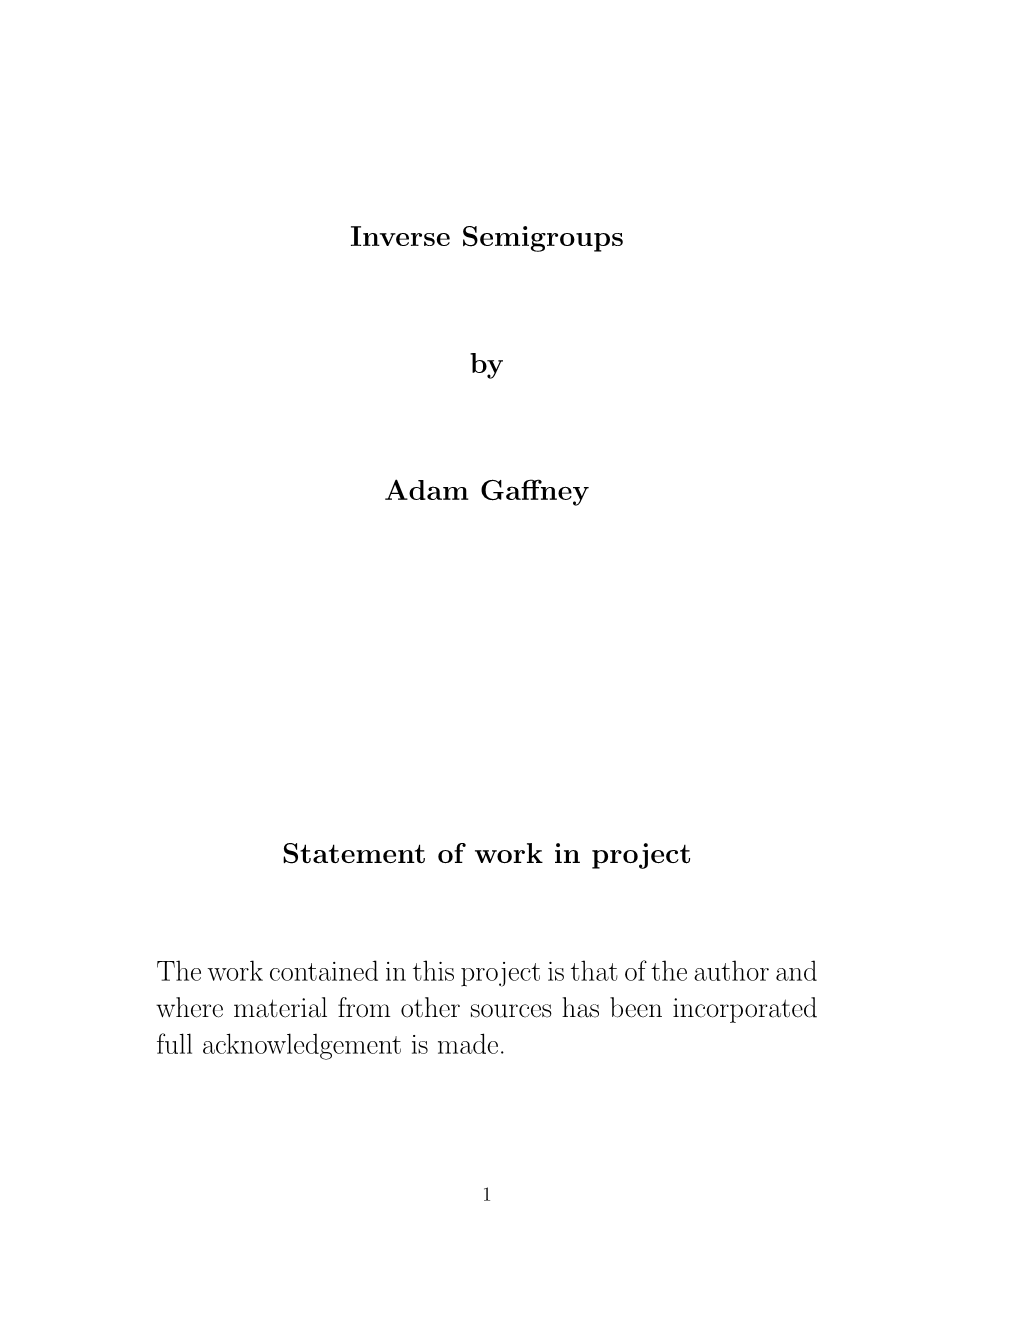 Inverse Semigroups by Adam Gaffney Statement of Work in Project